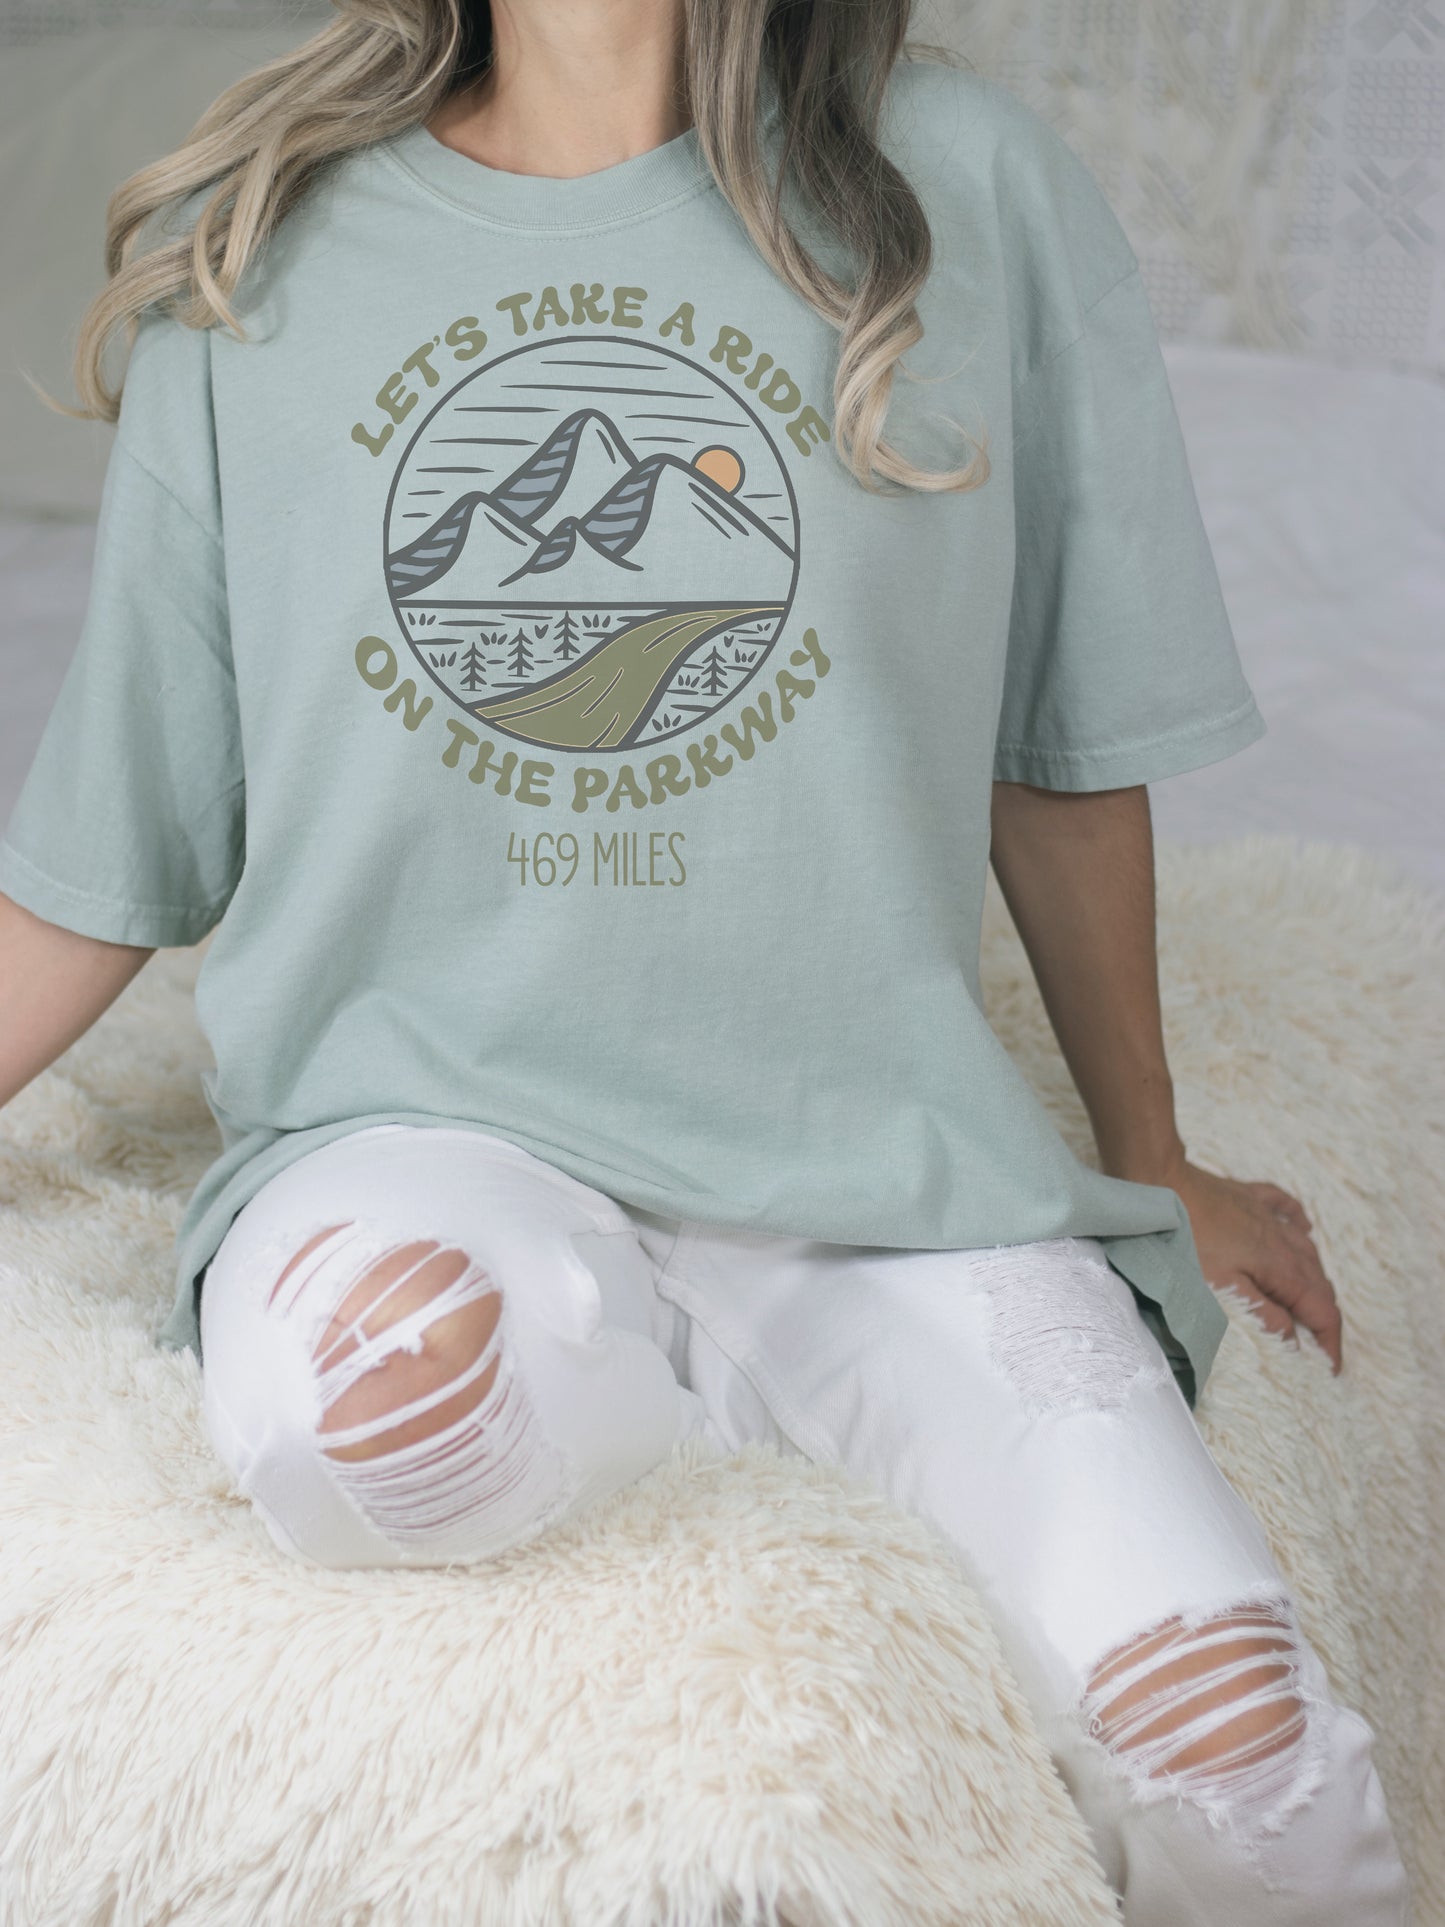 Let's Take a Ride on the Parkway Tee